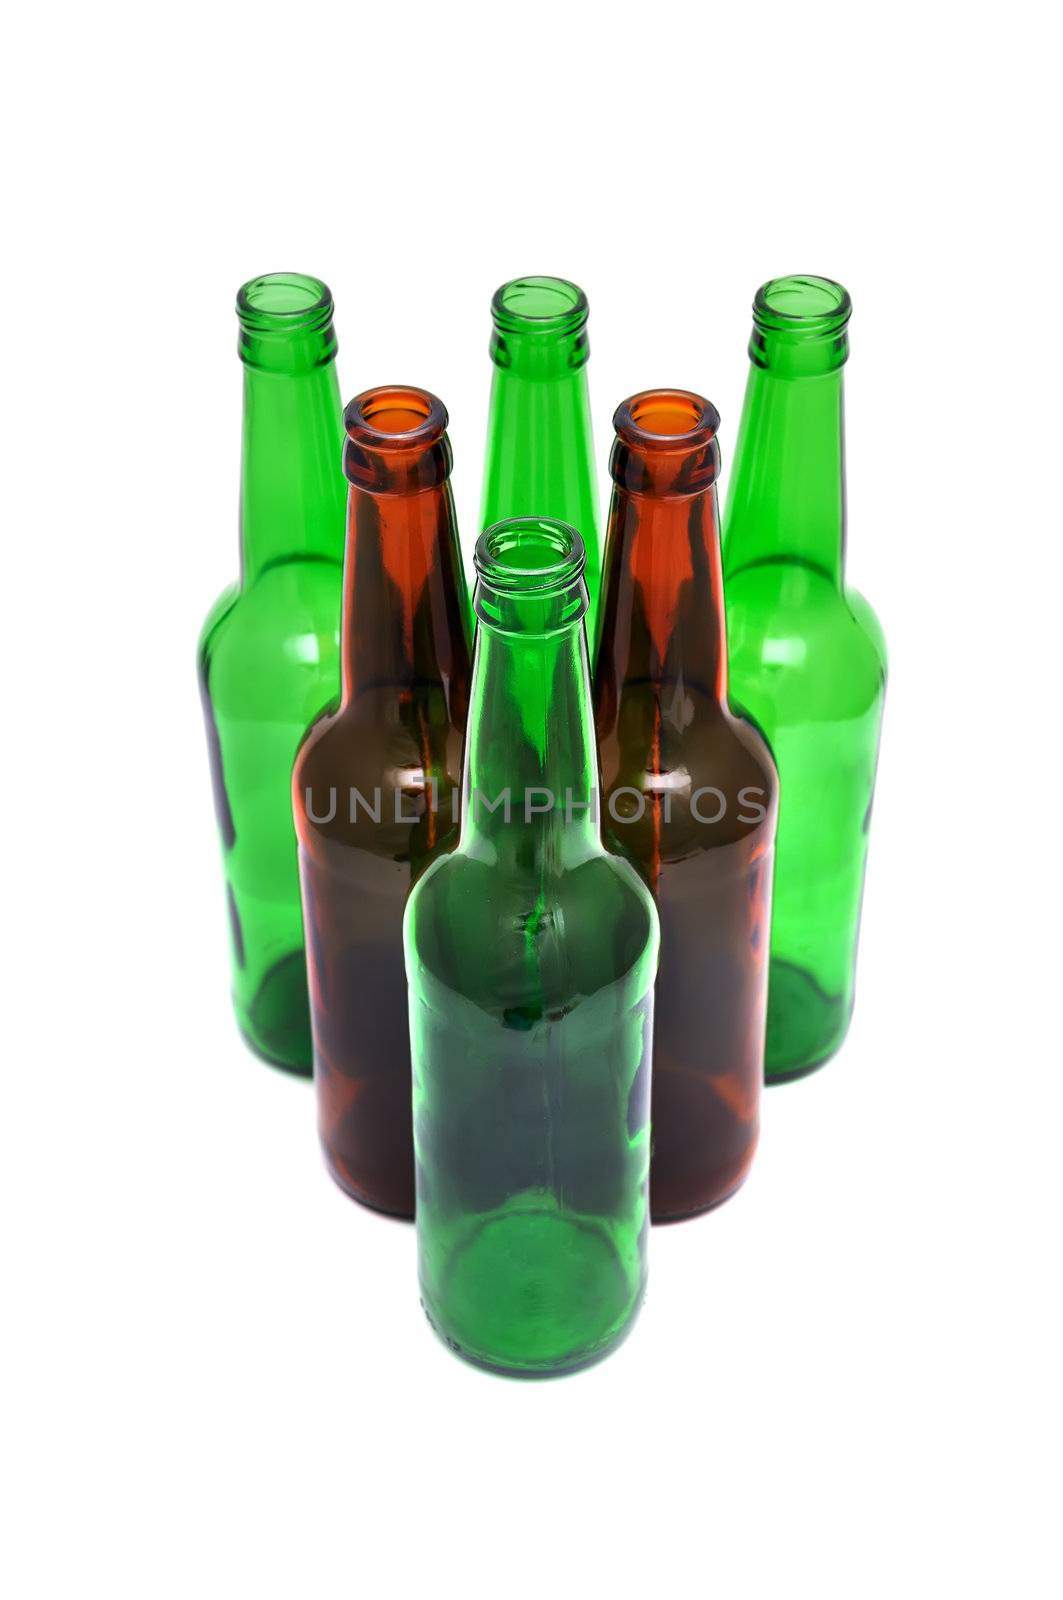 colored beer bottles on a white background